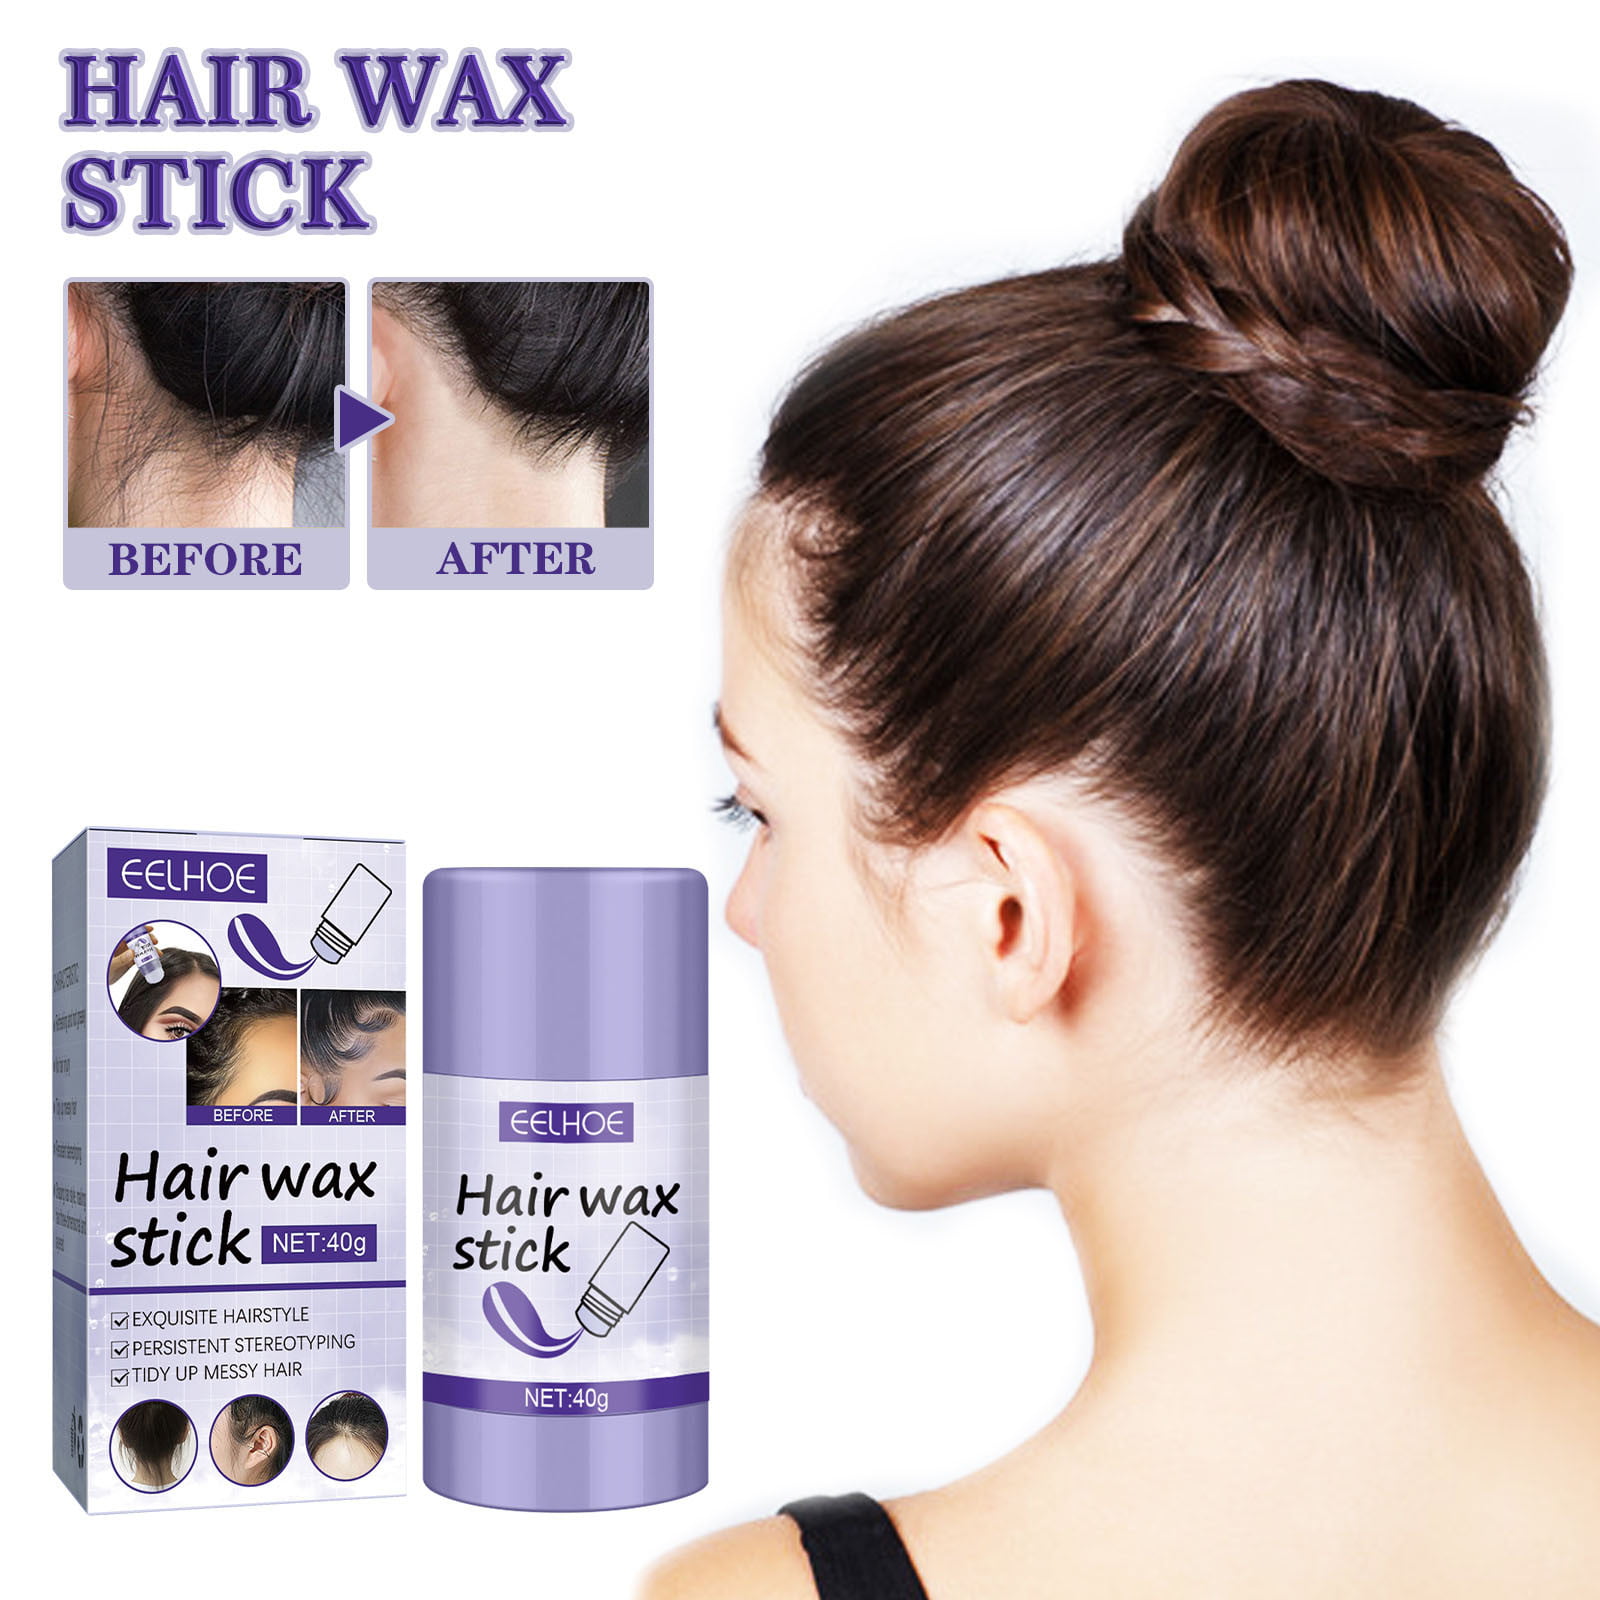 Wax stick for styling and frizzy hair, 75 grams - كوينز كير